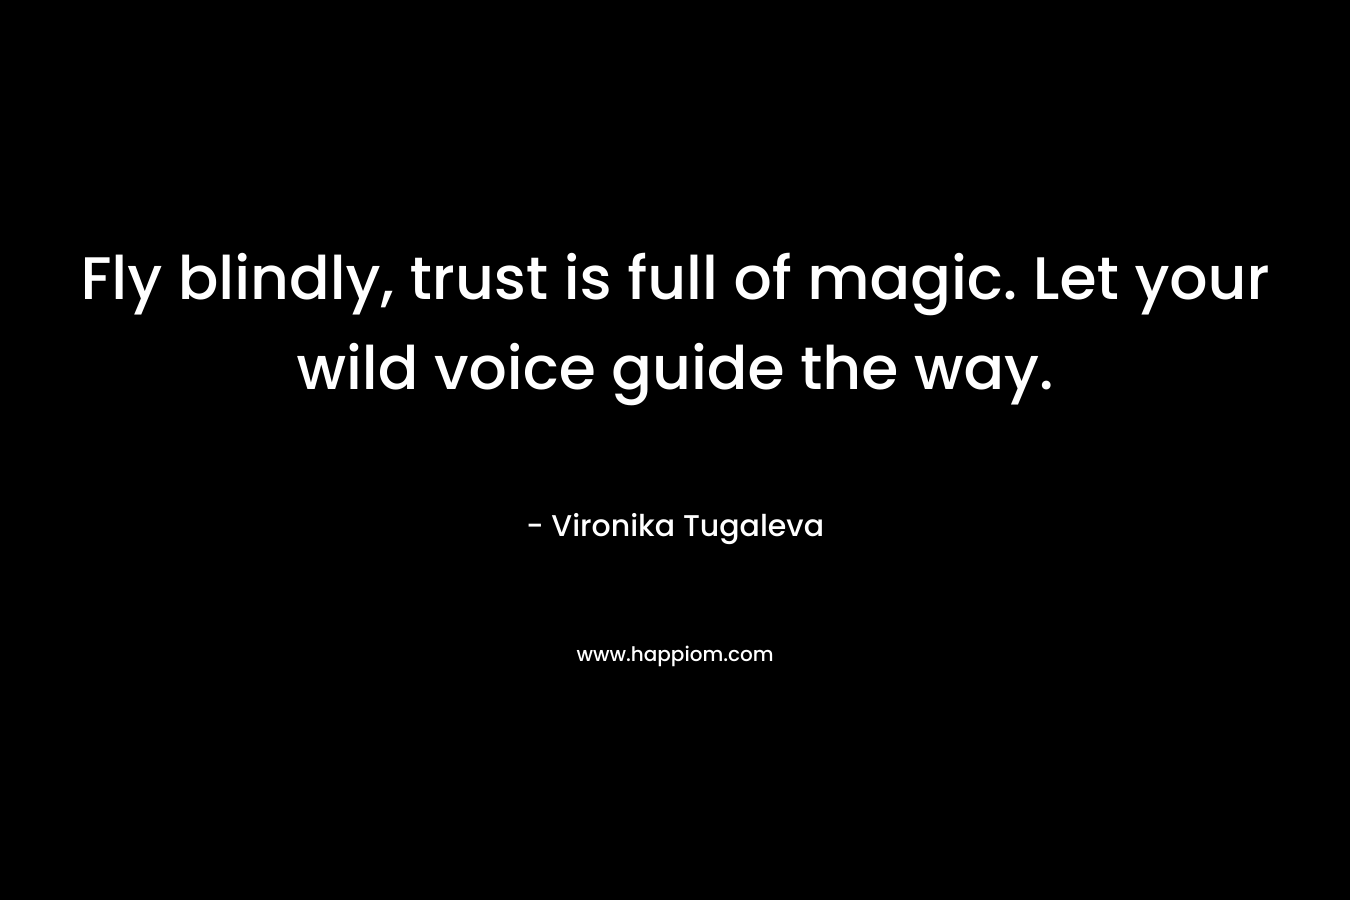 Fly blindly, trust is full of magic. Let your wild voice guide the way.